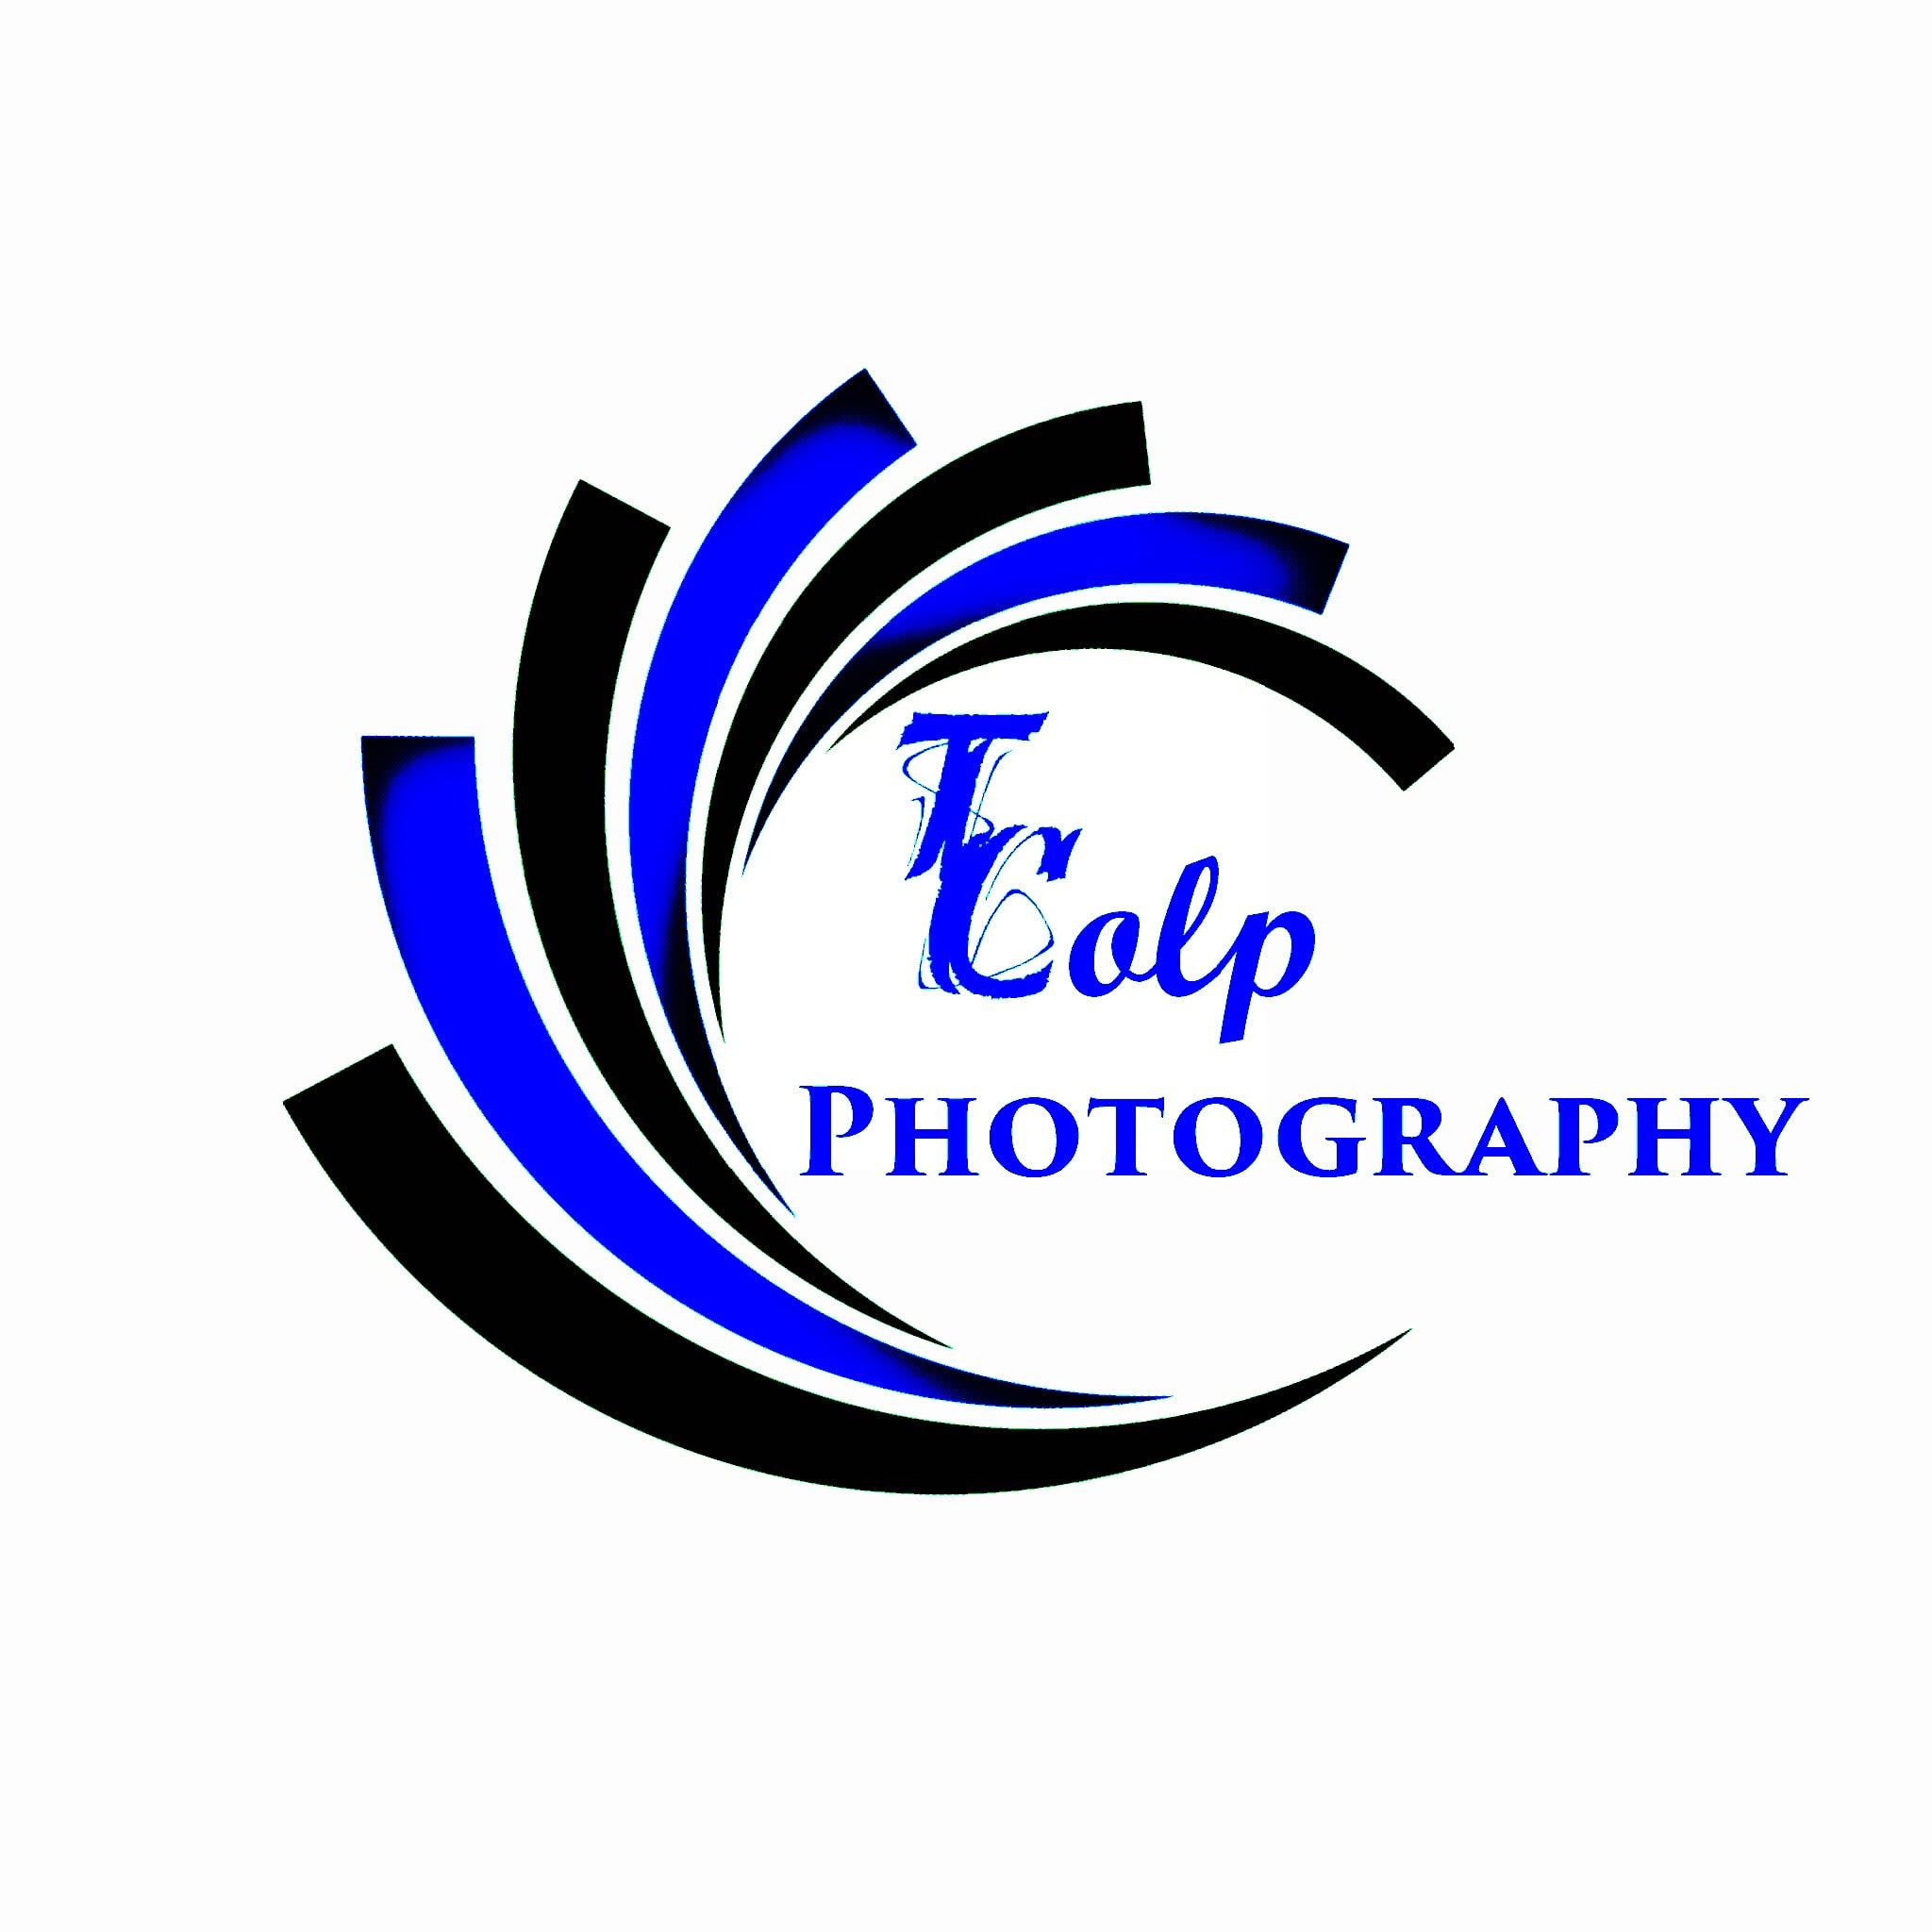 T Colp Photography